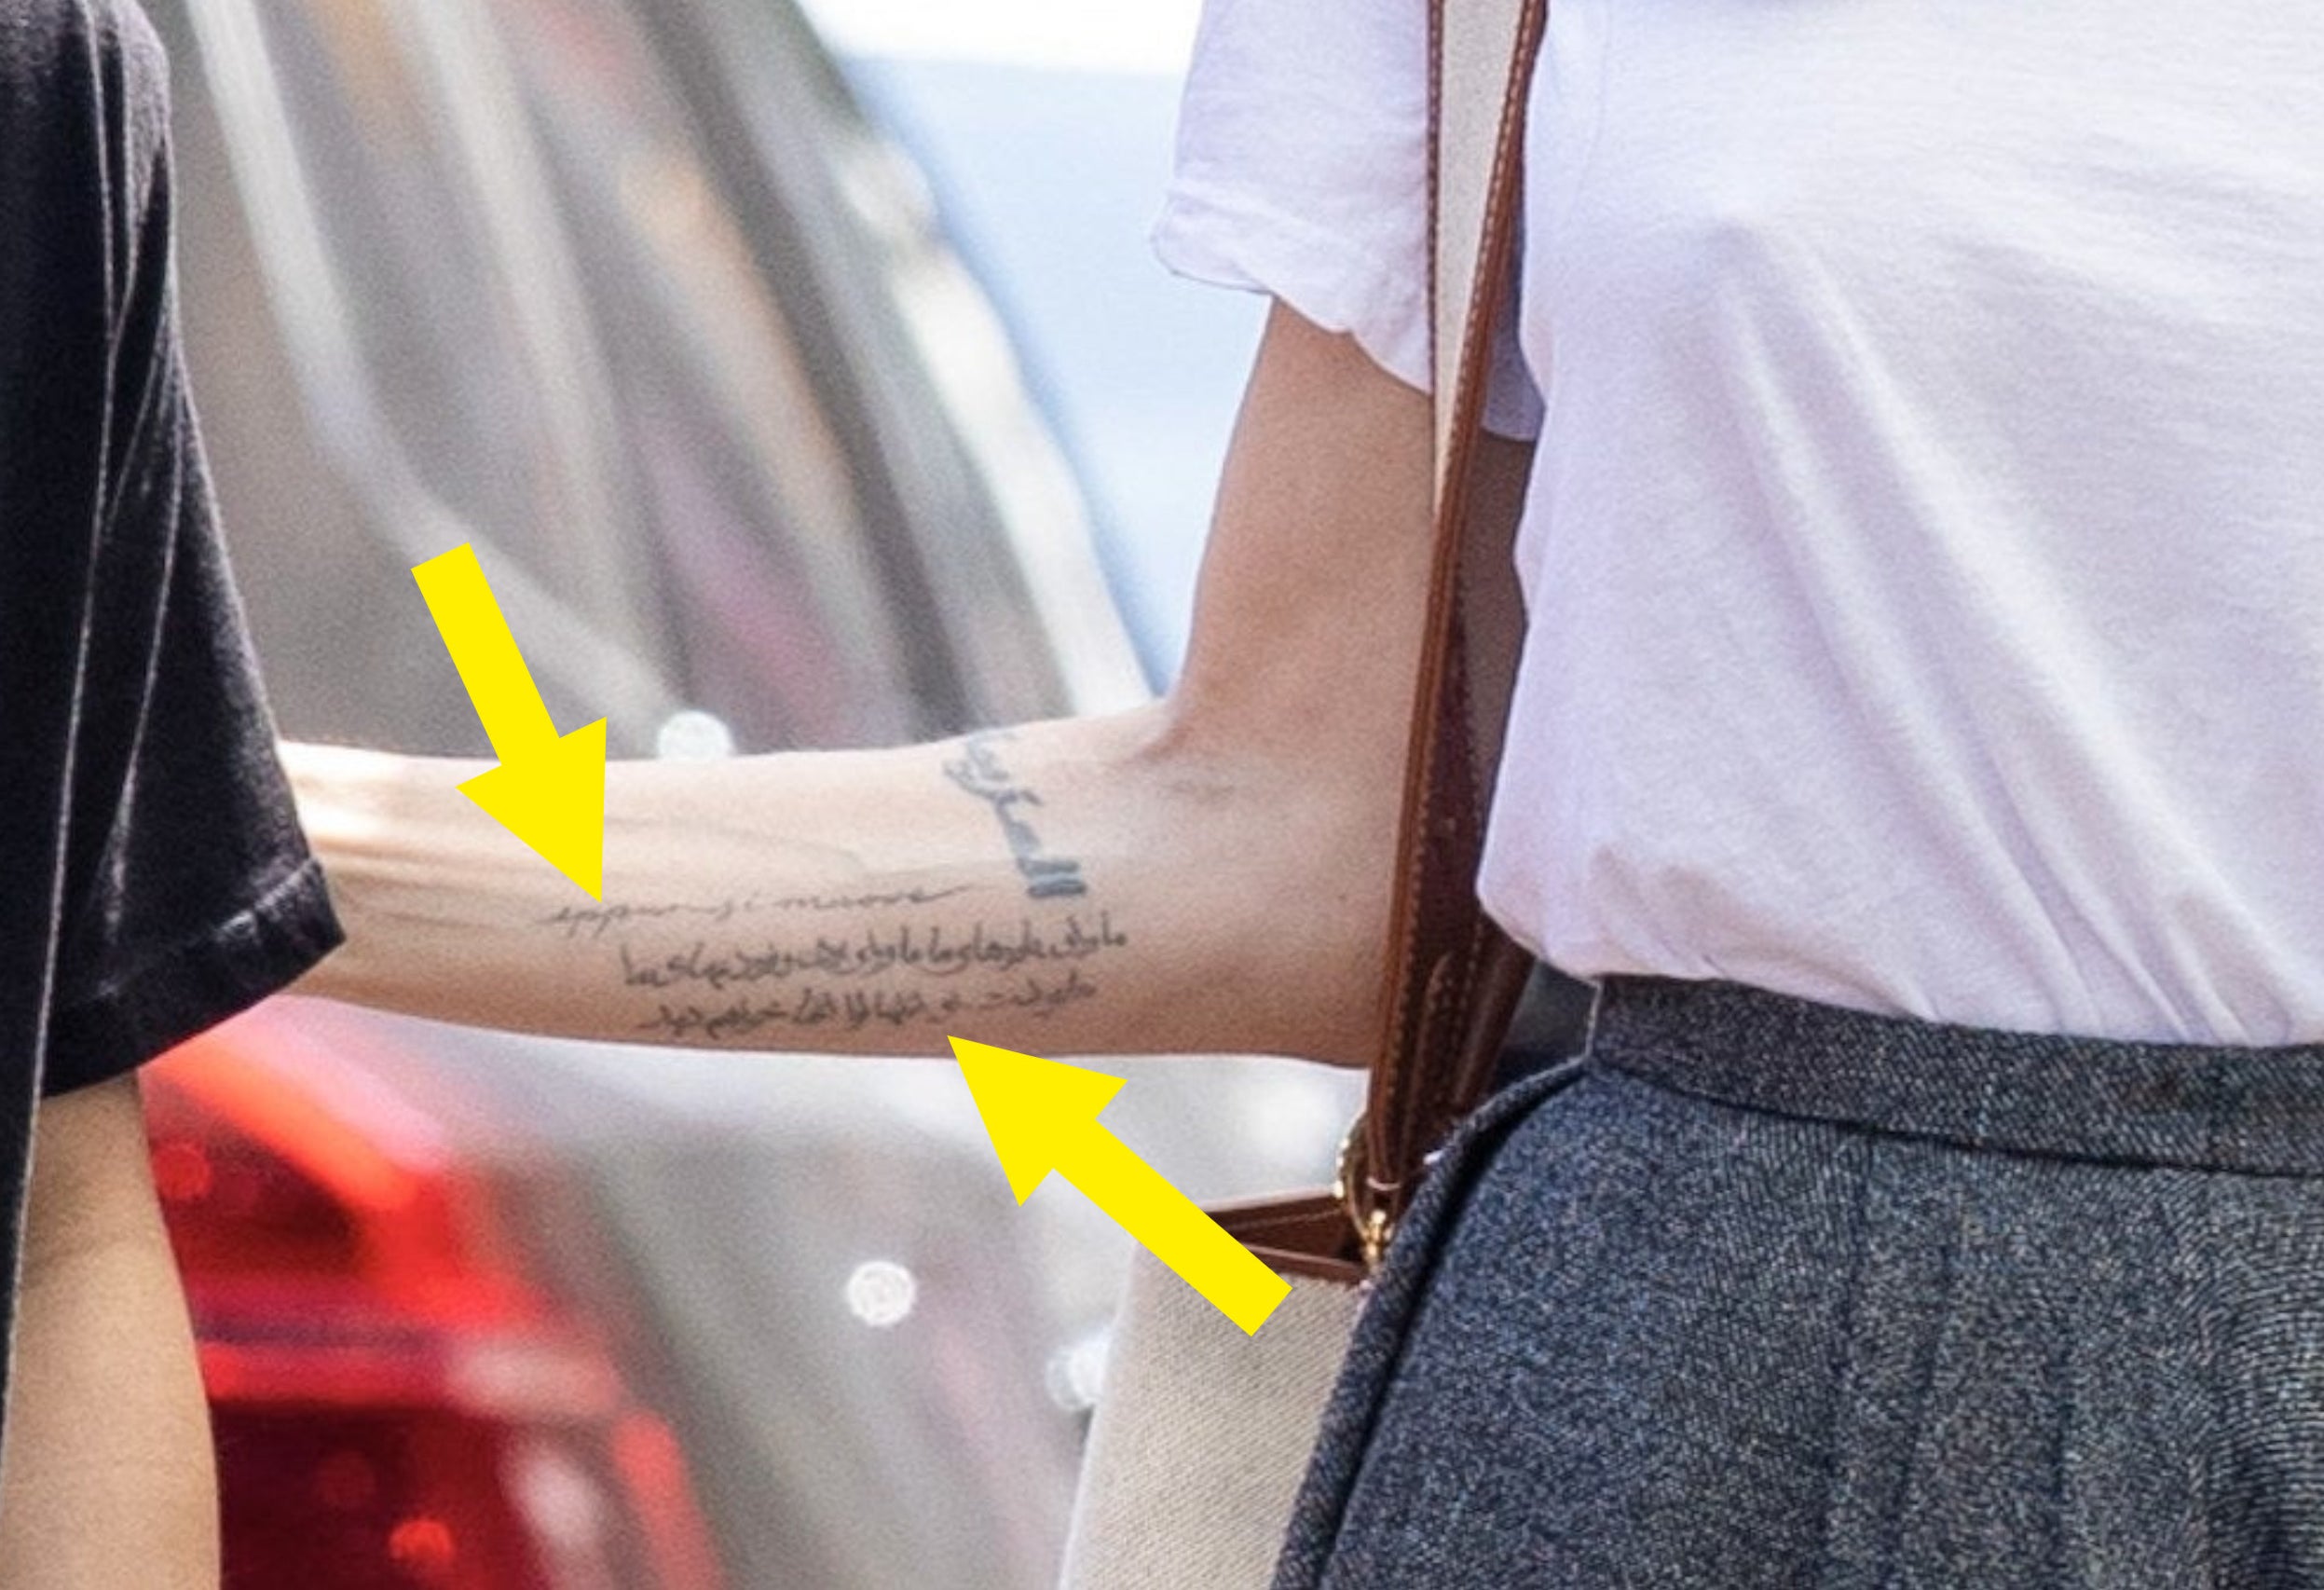 A close-up with arrows pointing to the two tattoos next to each other